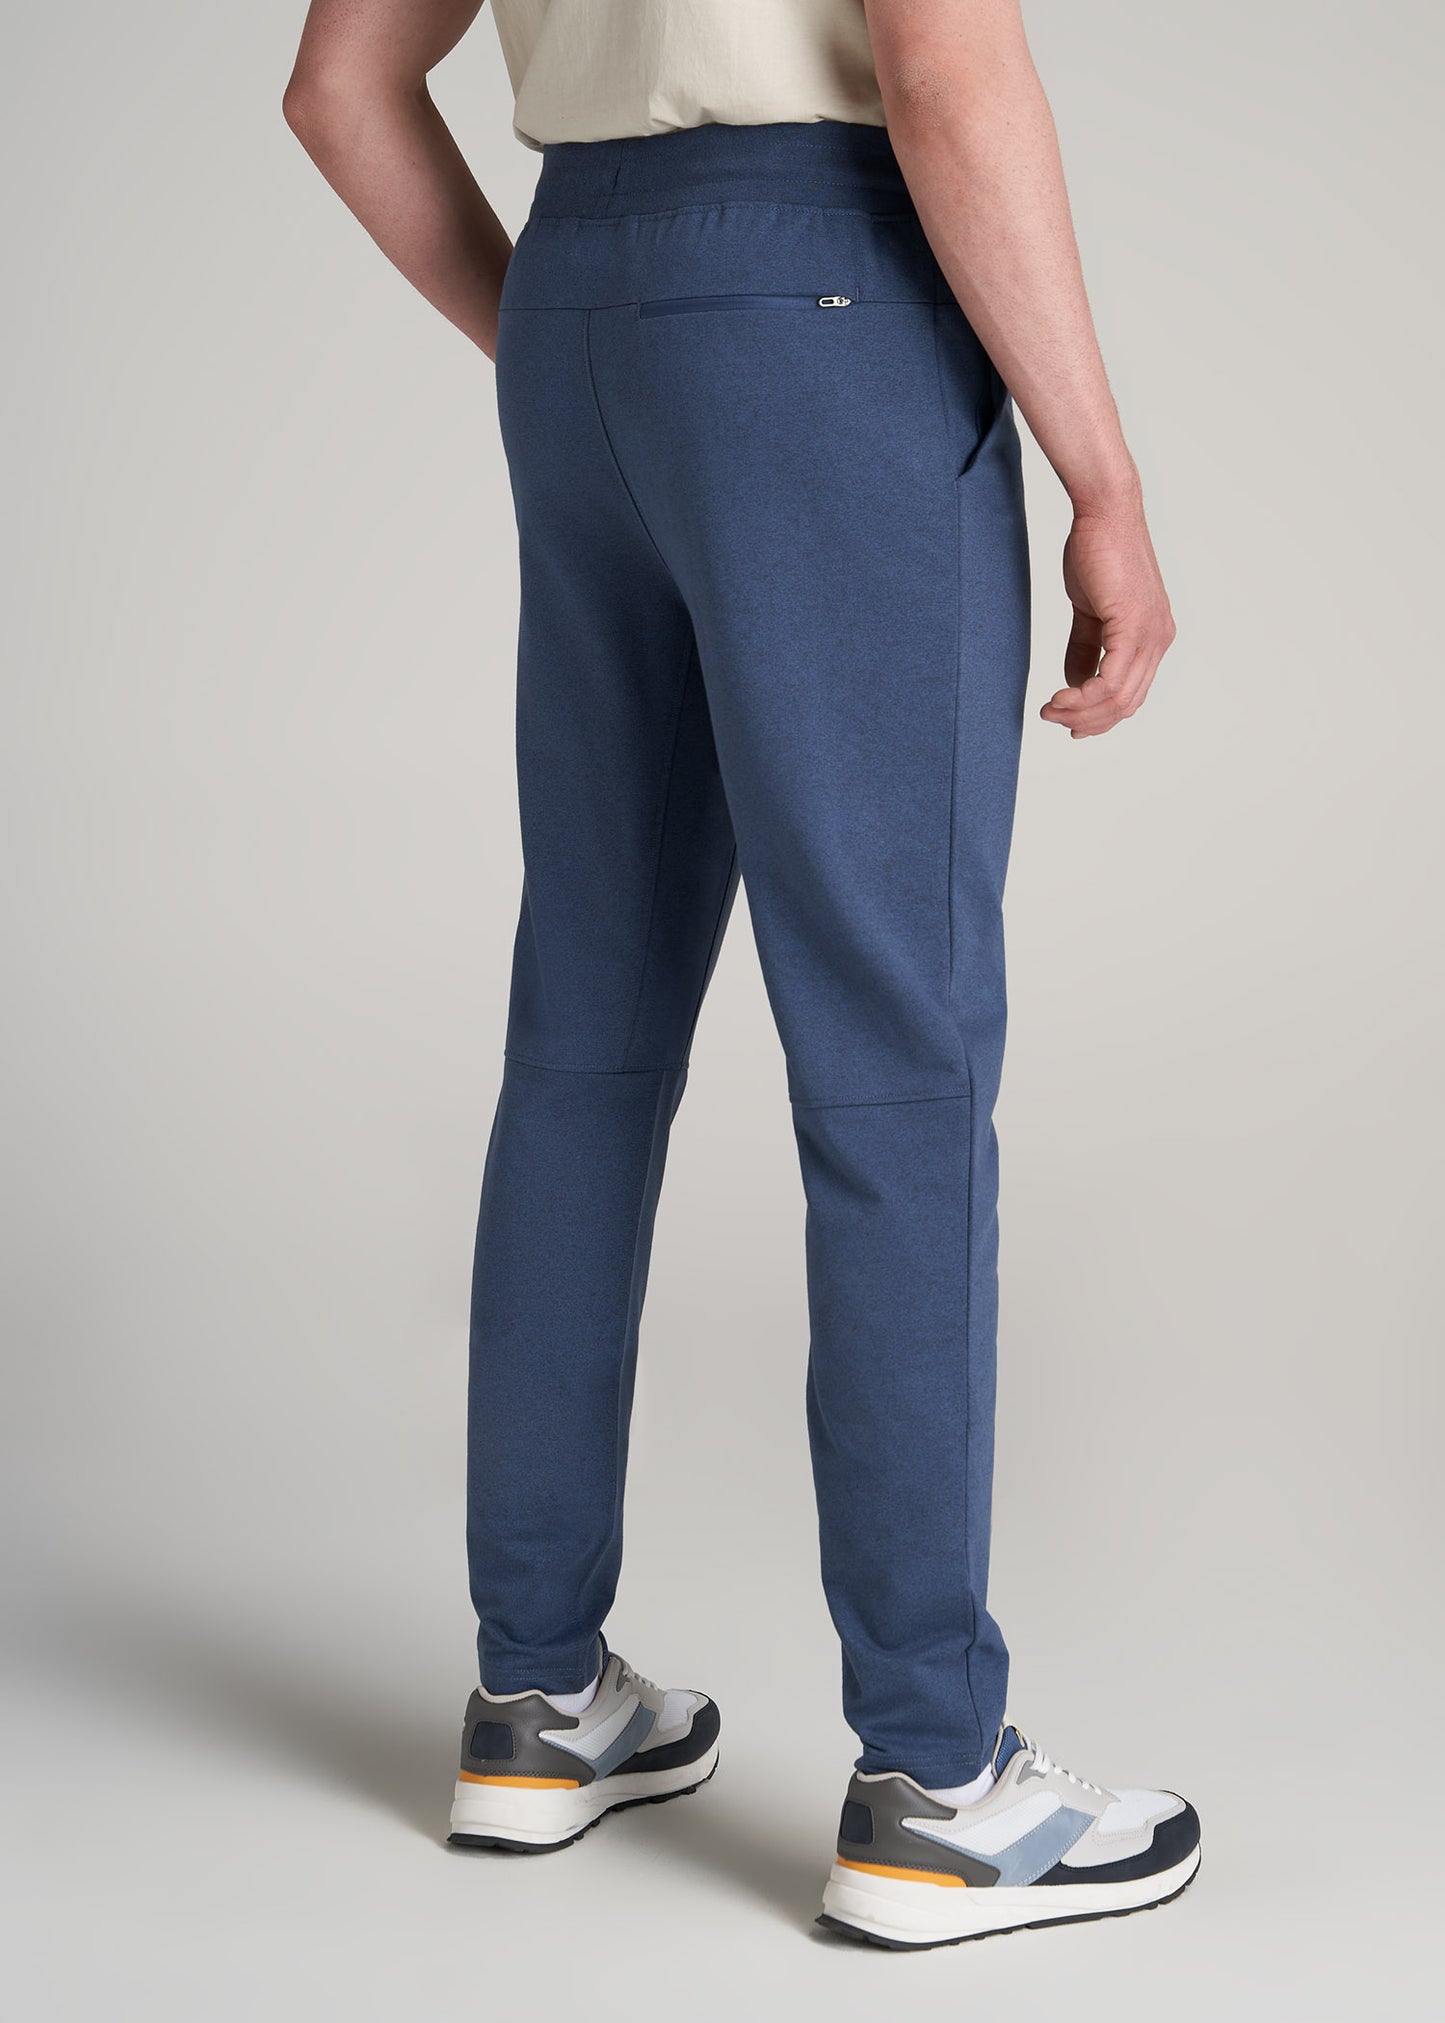 Navy Pull-On French Terry Pants